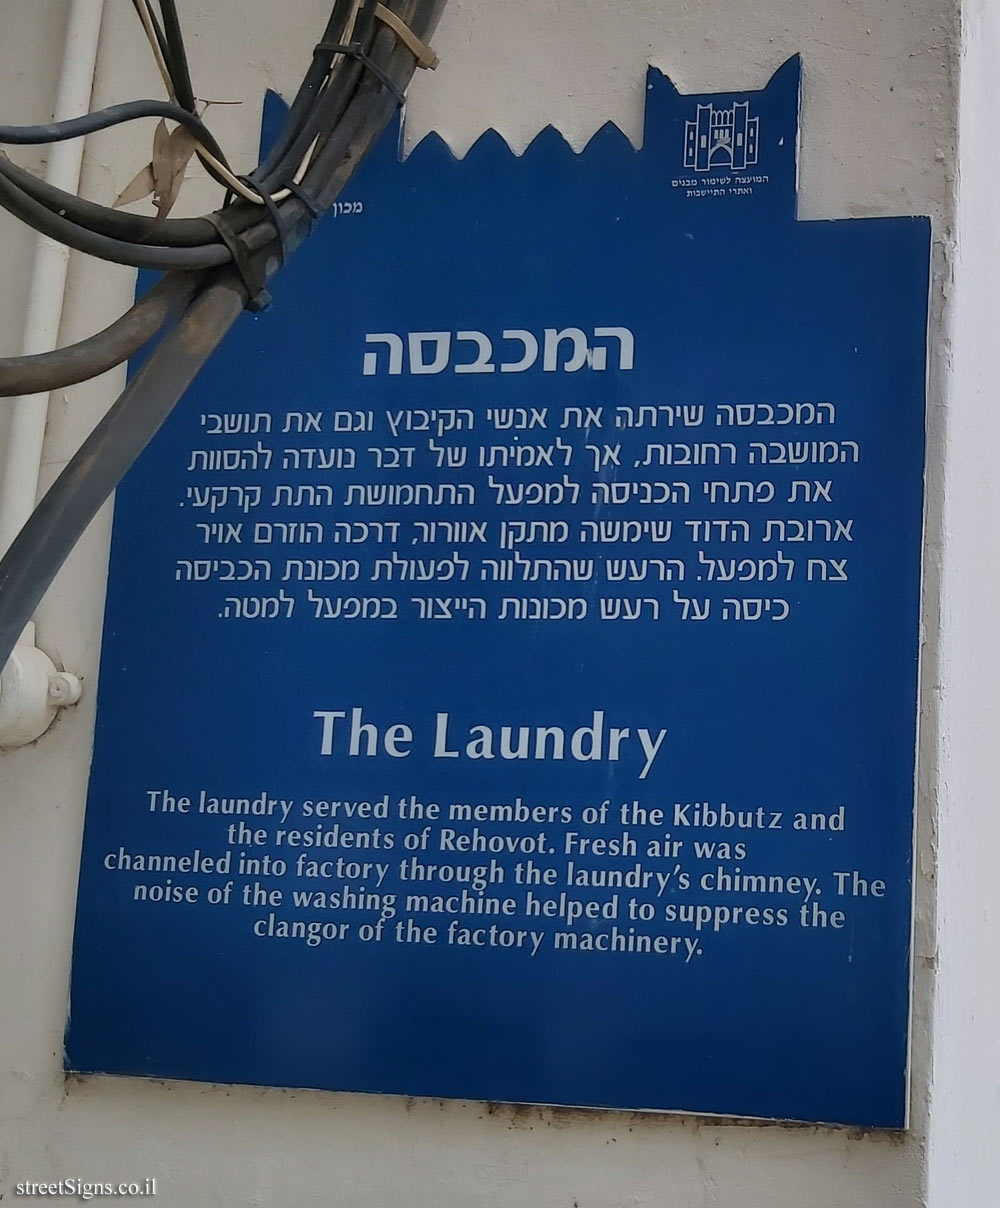 Rehovot - Heritage Sites in Israel - Ayalon Institute - The Laundry